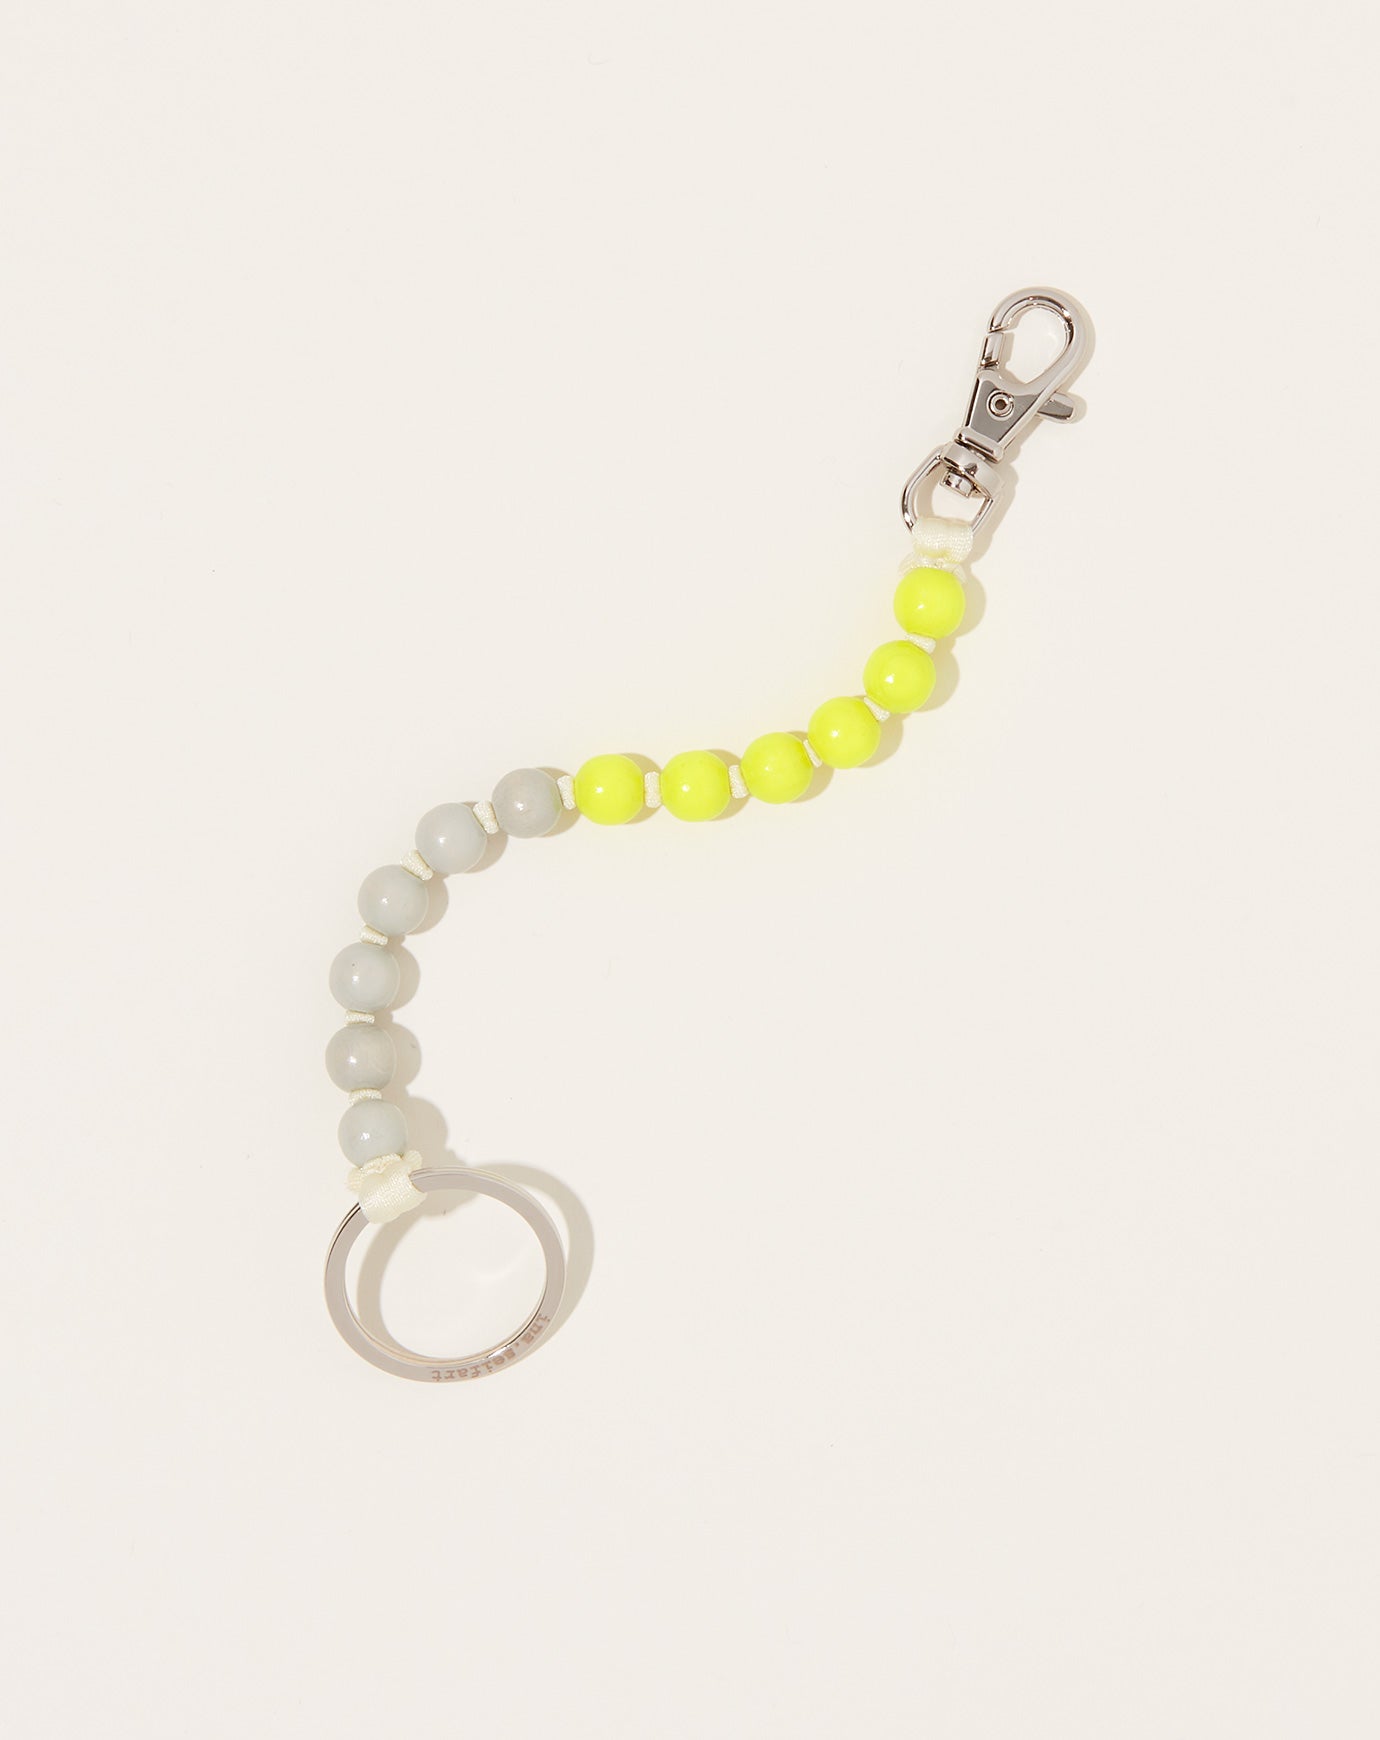 Ina Seifart Perlen Short Keyholder in Light Grey Neon Yellow and Opal